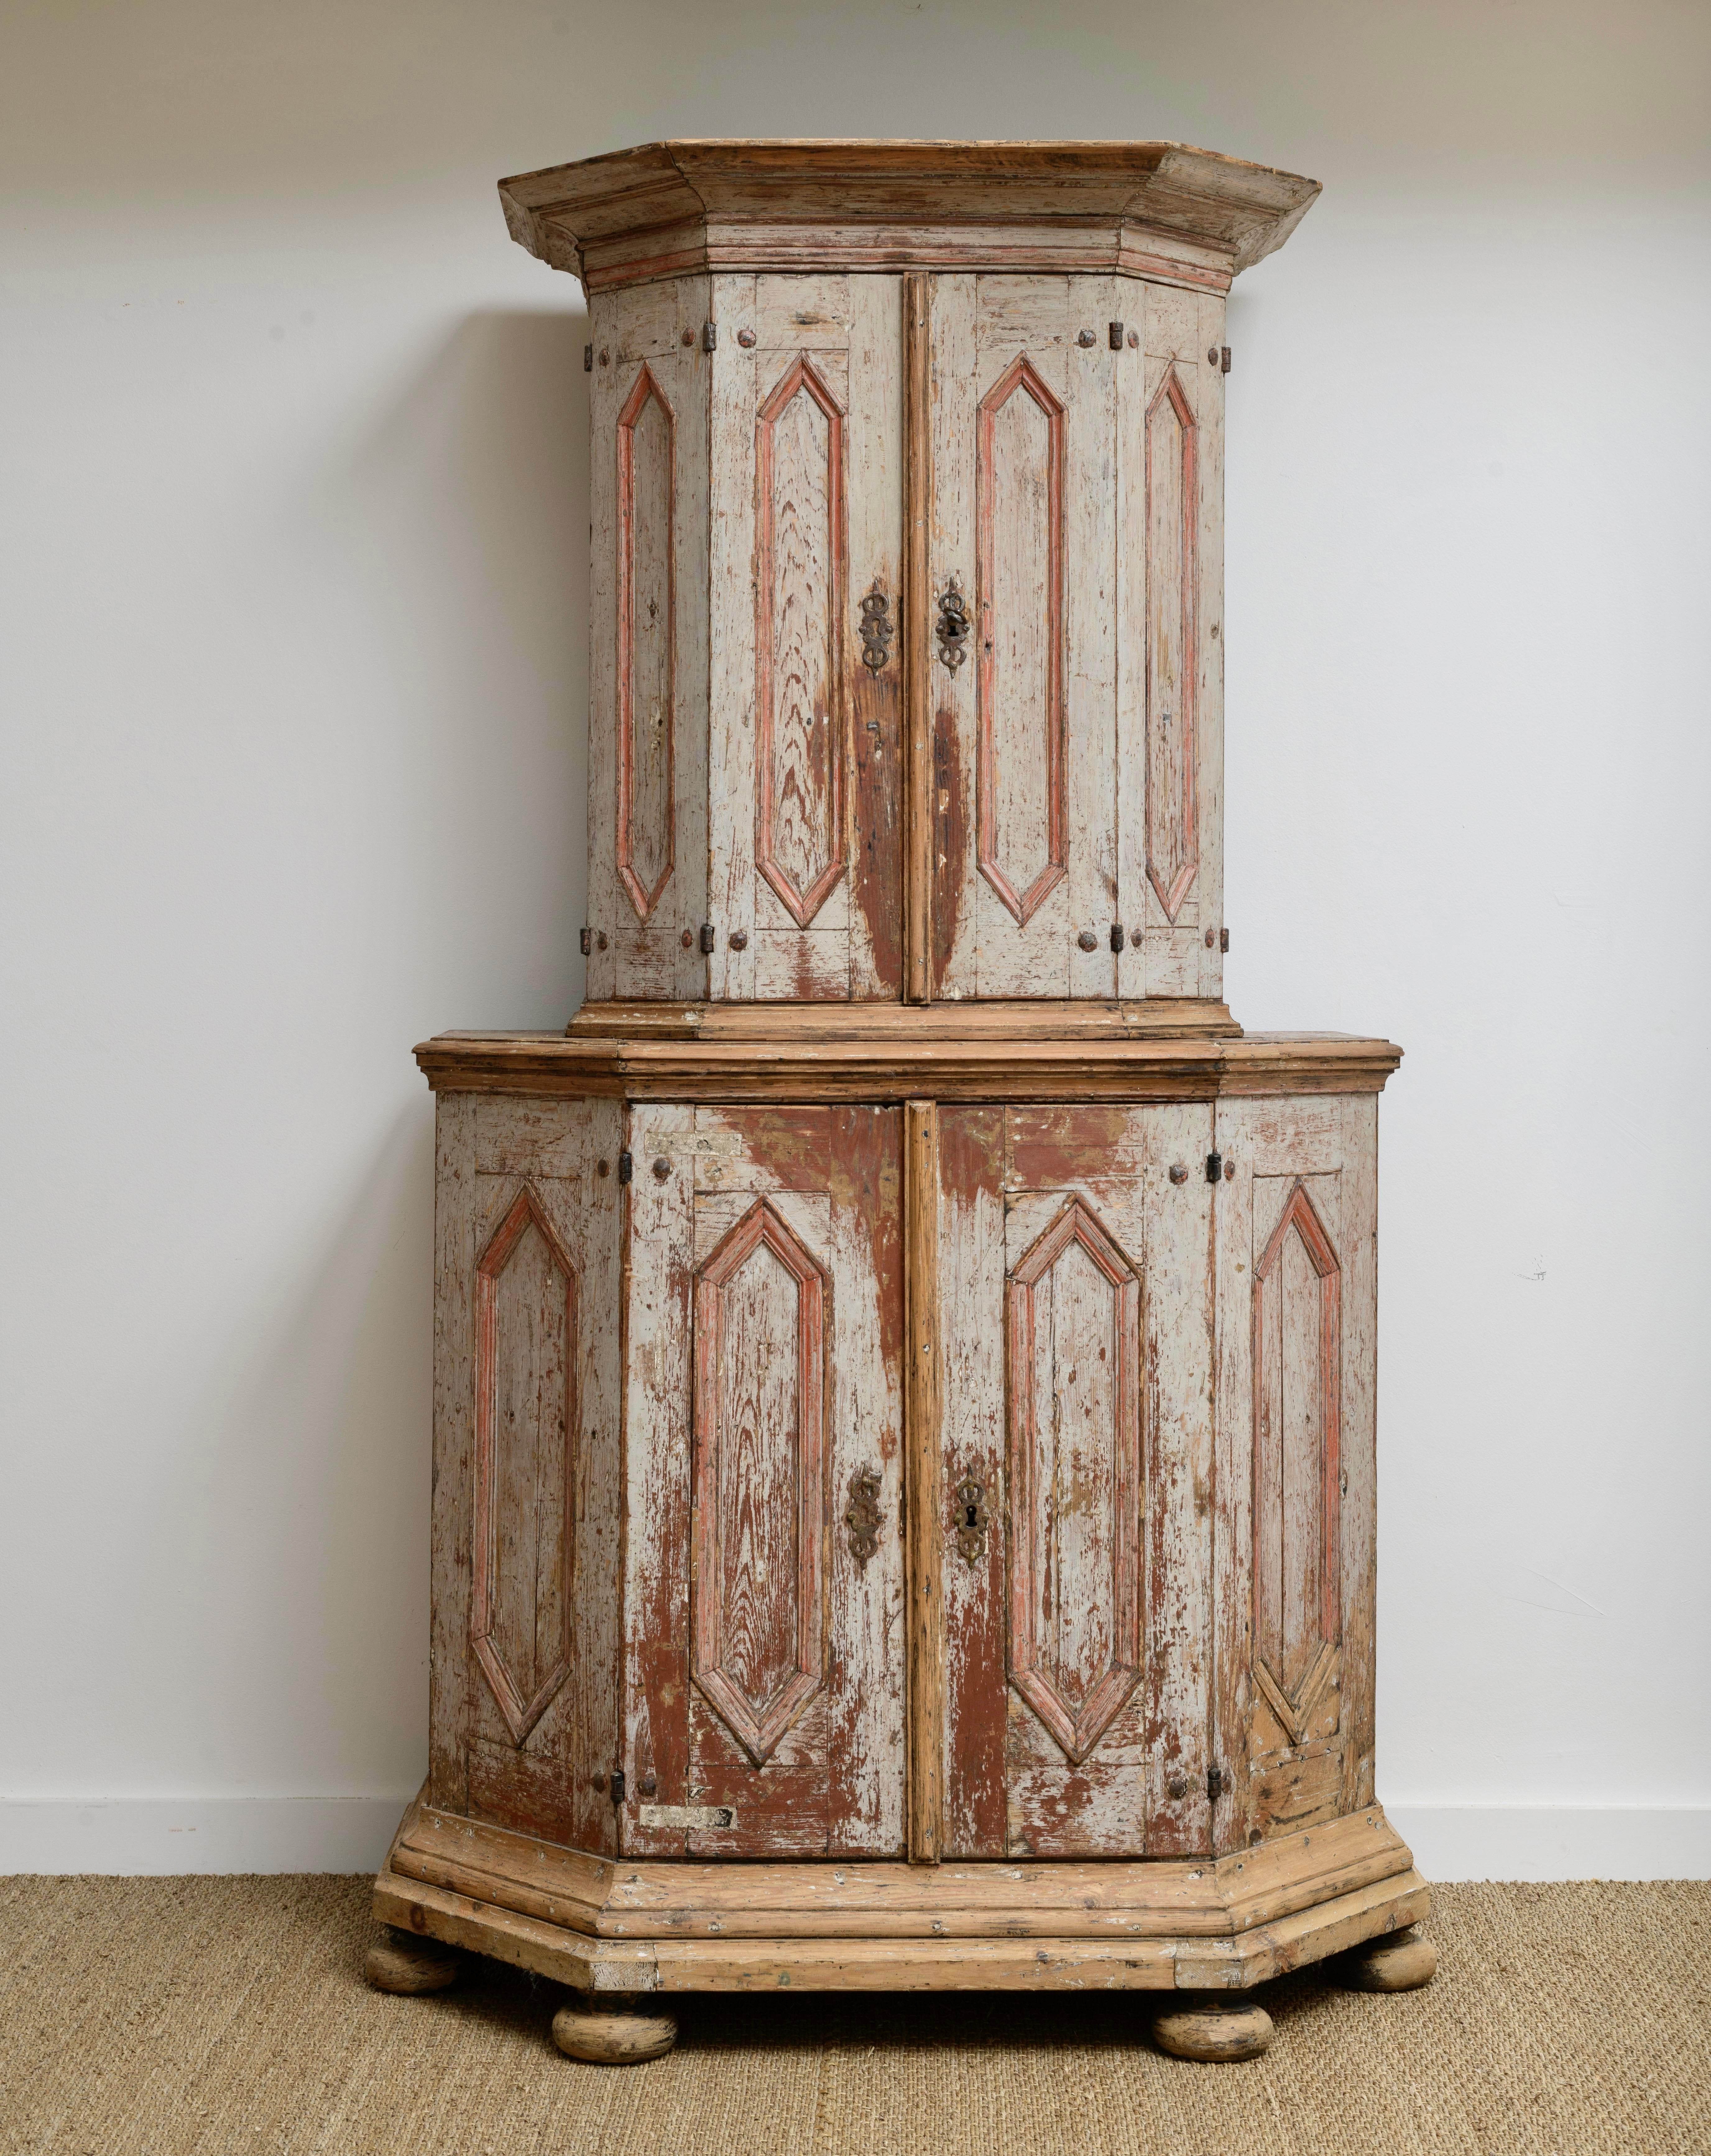 Ca.1750 Swedish baroque cabinet on cabinet with origin paint in the tones of Grey and light red color.  
this piece has not been dry scraped but has paint loss through use since it was made.  Wonderful articulating upend doors with original hardware